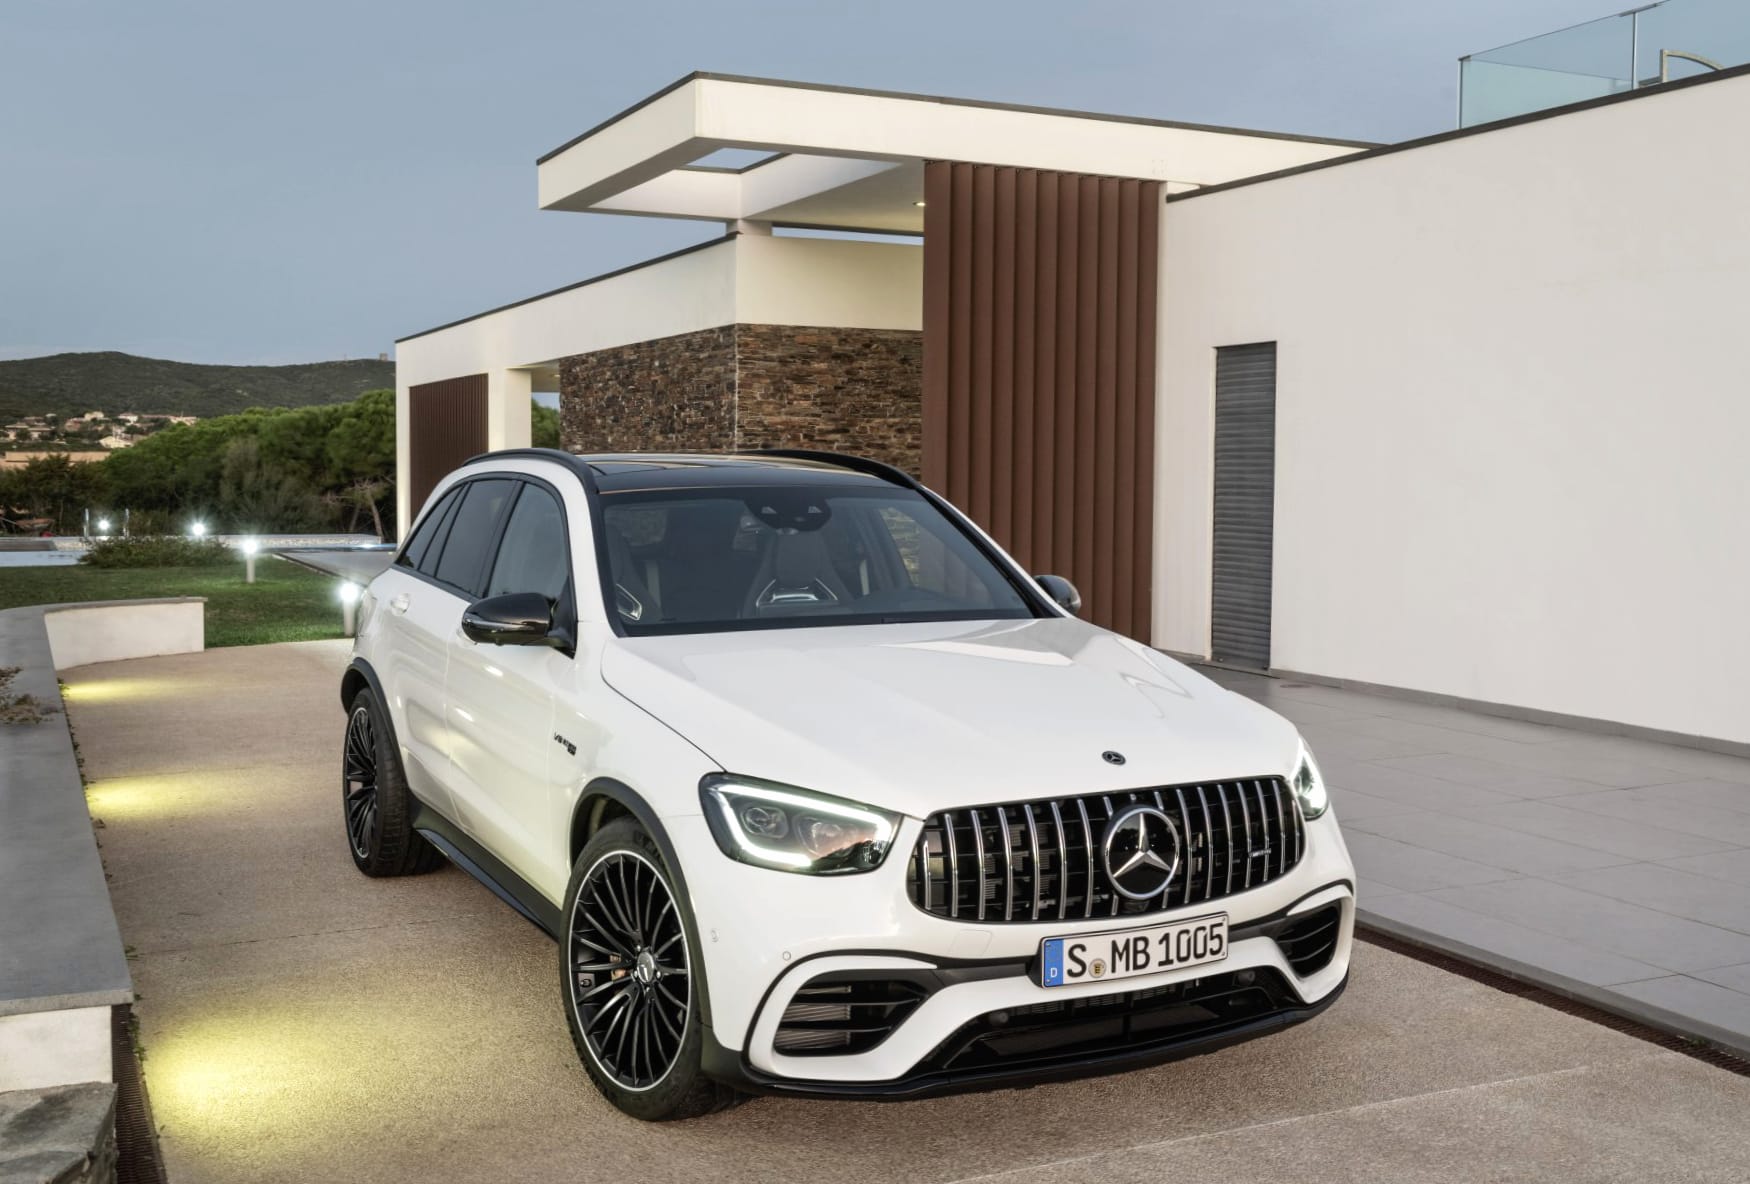 Mercedes-AMG GLC 63 S wallpapers HD quality